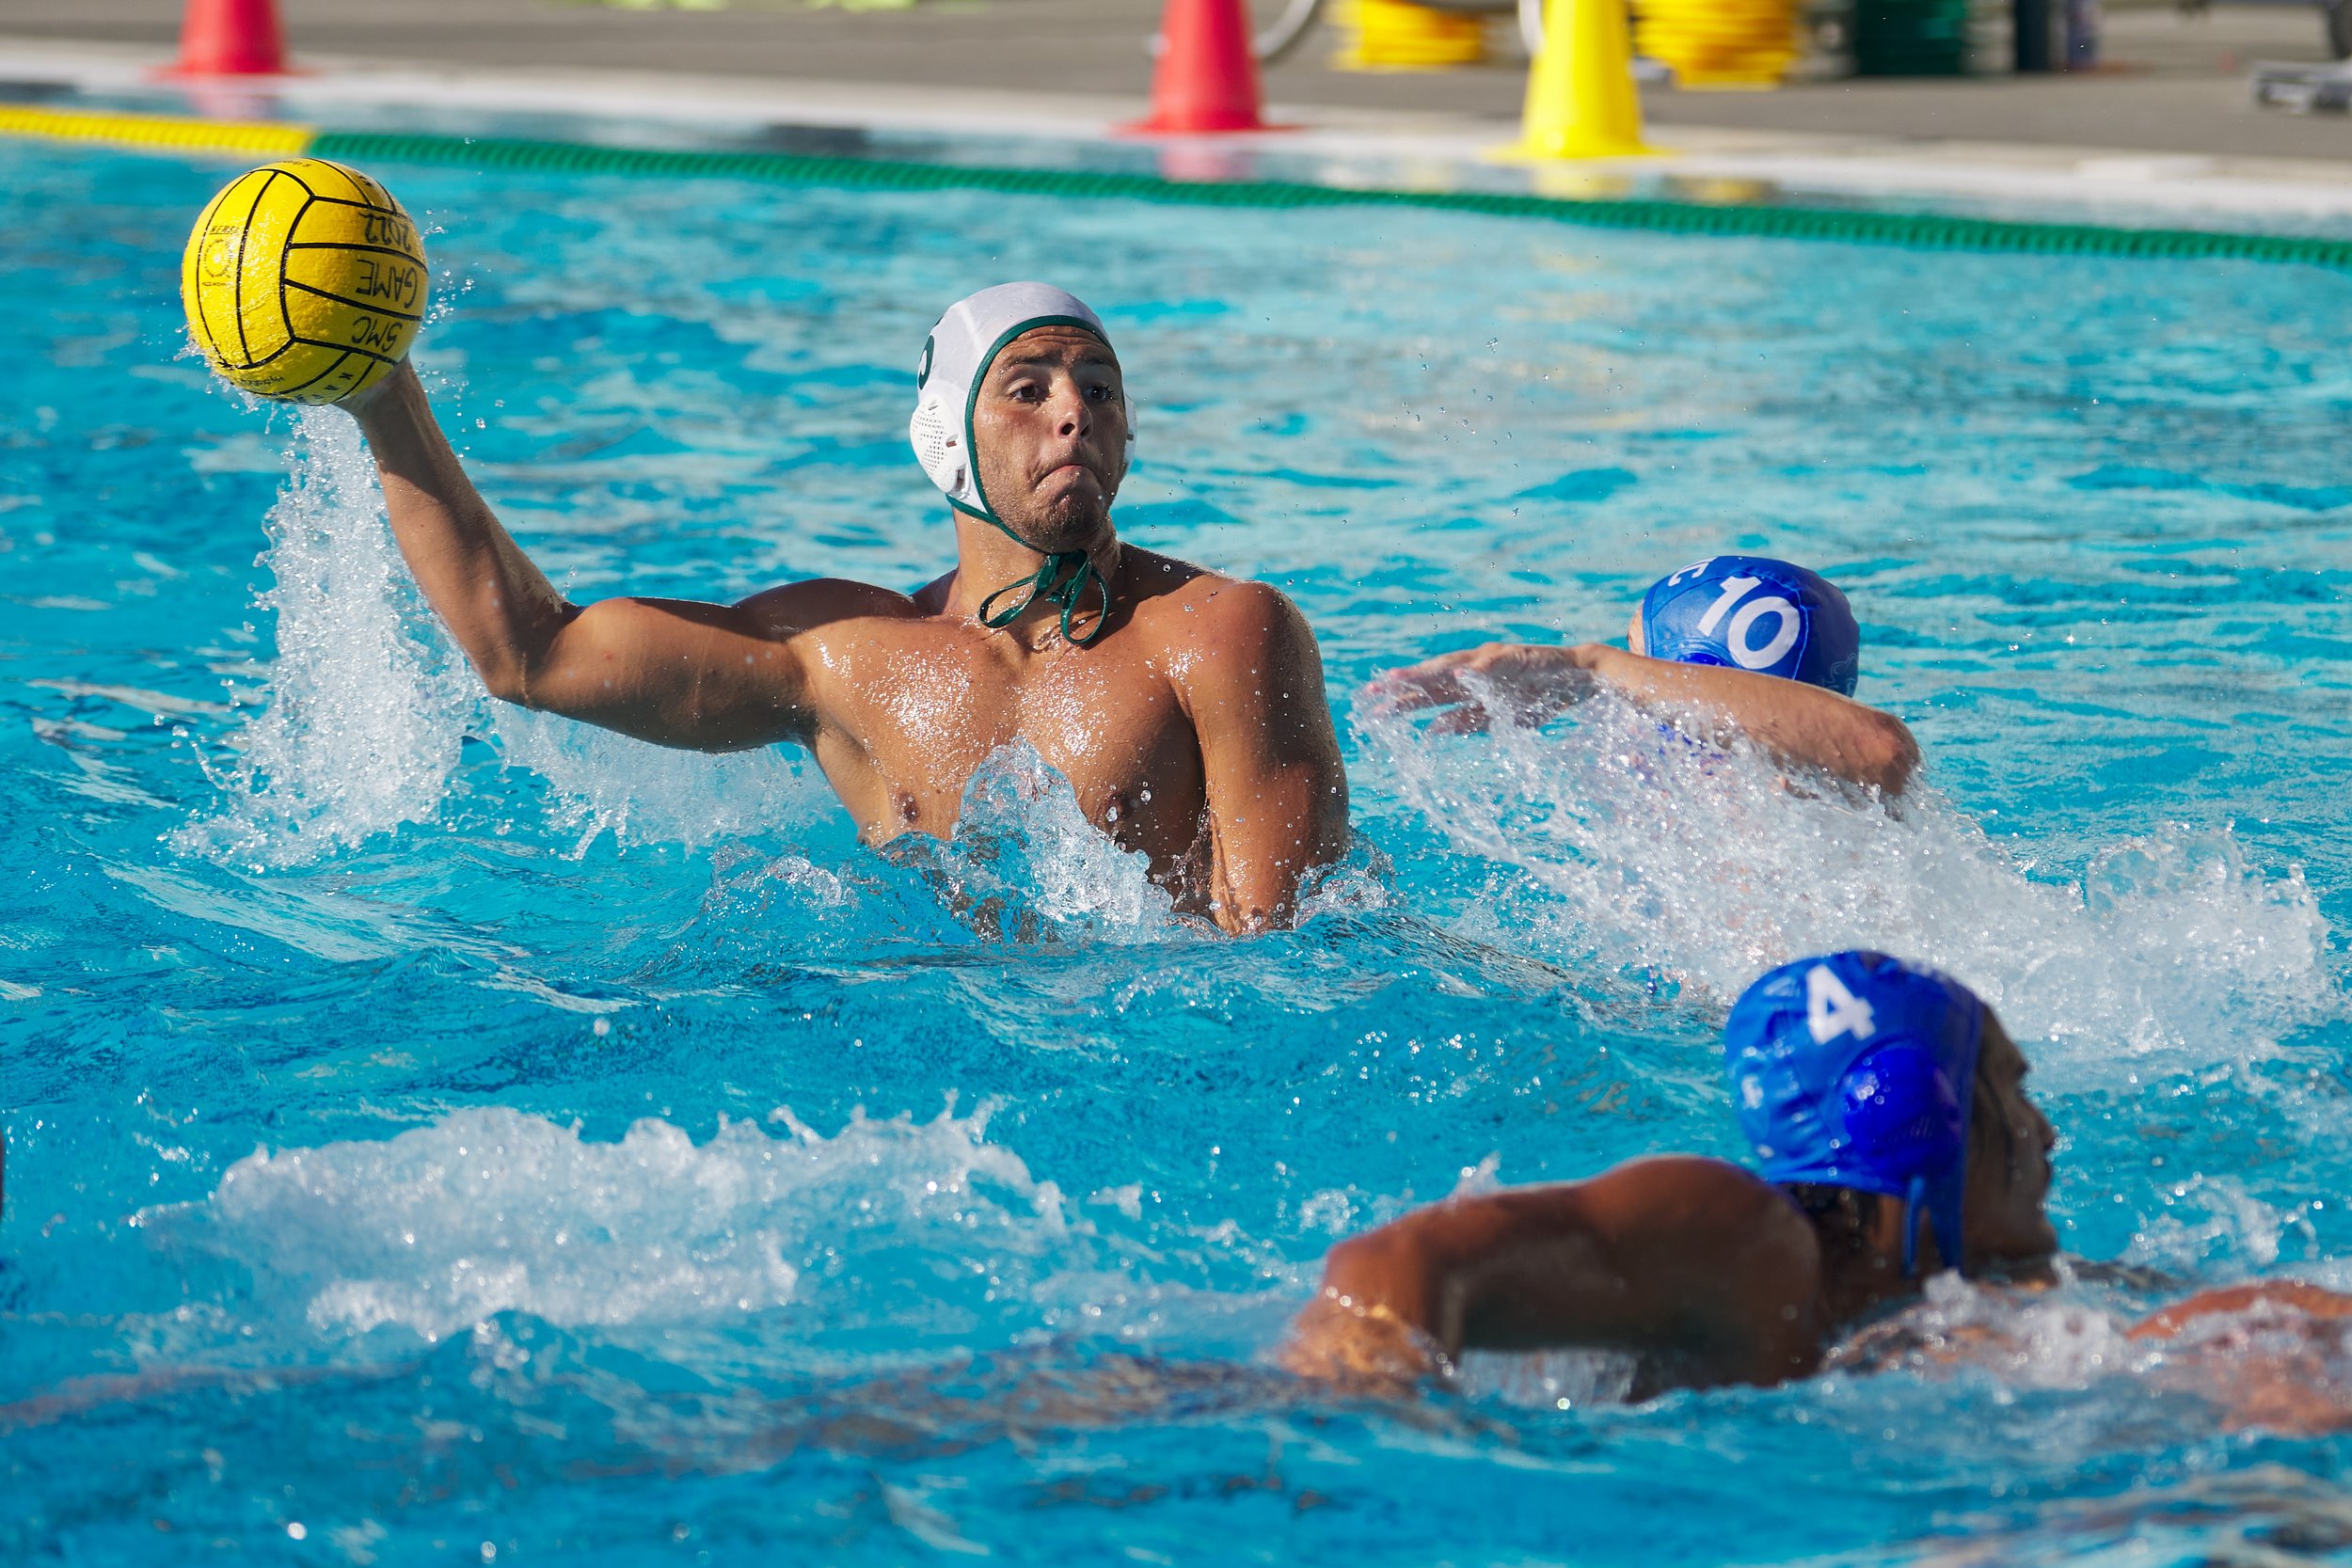  Los Angeles Valley College Monarchs' Niki Matheisen during the men's water polo match against the Santa Monica College Corsairs on Wednesday, Sept. 28, 2022, at the SMC Aquatics Center in Santa Monica, Calif. The Corsairs lost 23-4. (Nicholas McCall